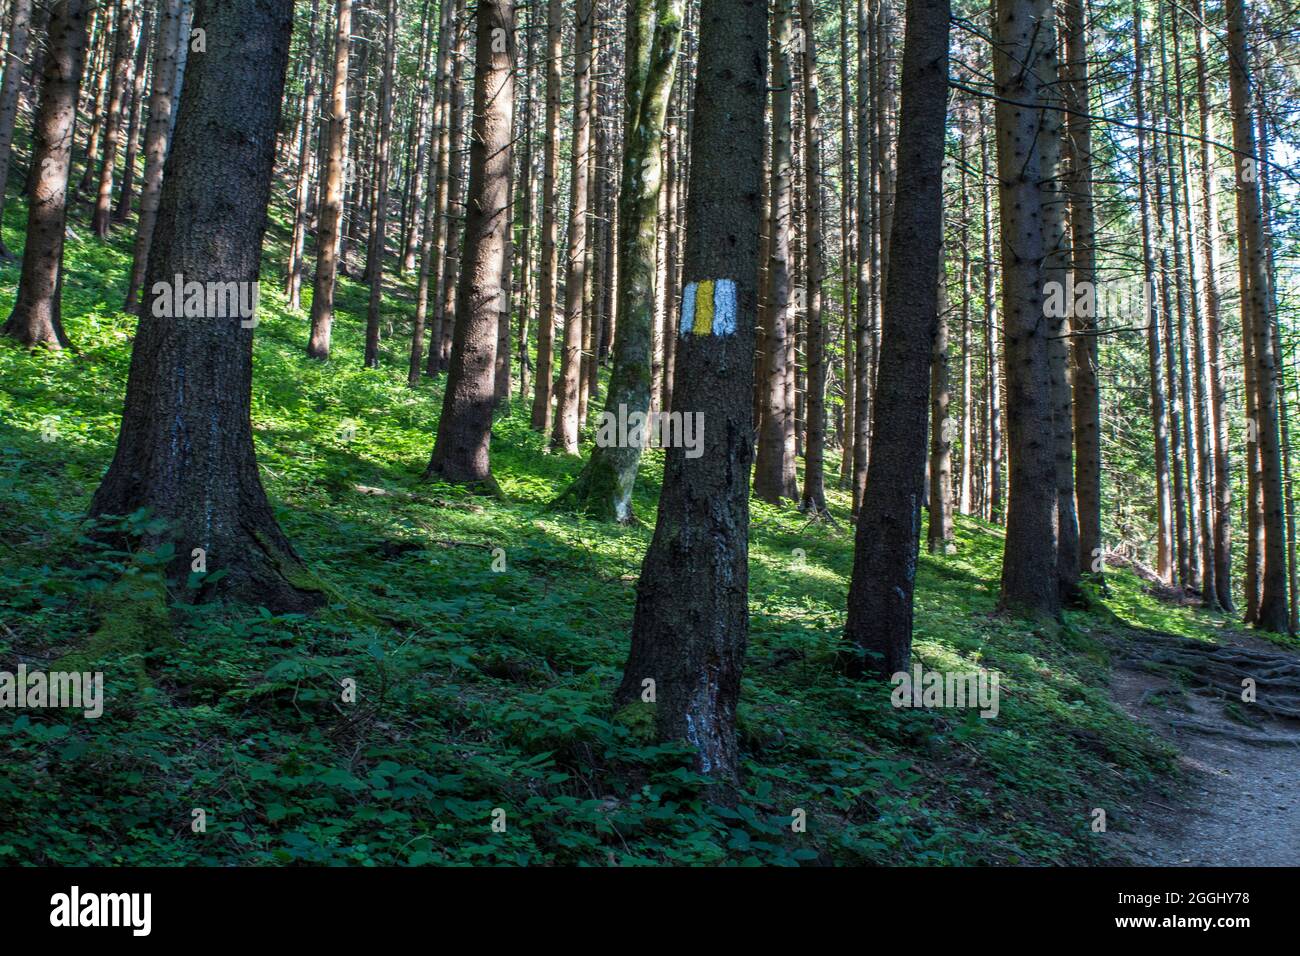 Trailing route mark in a pine forest. Stock Photo